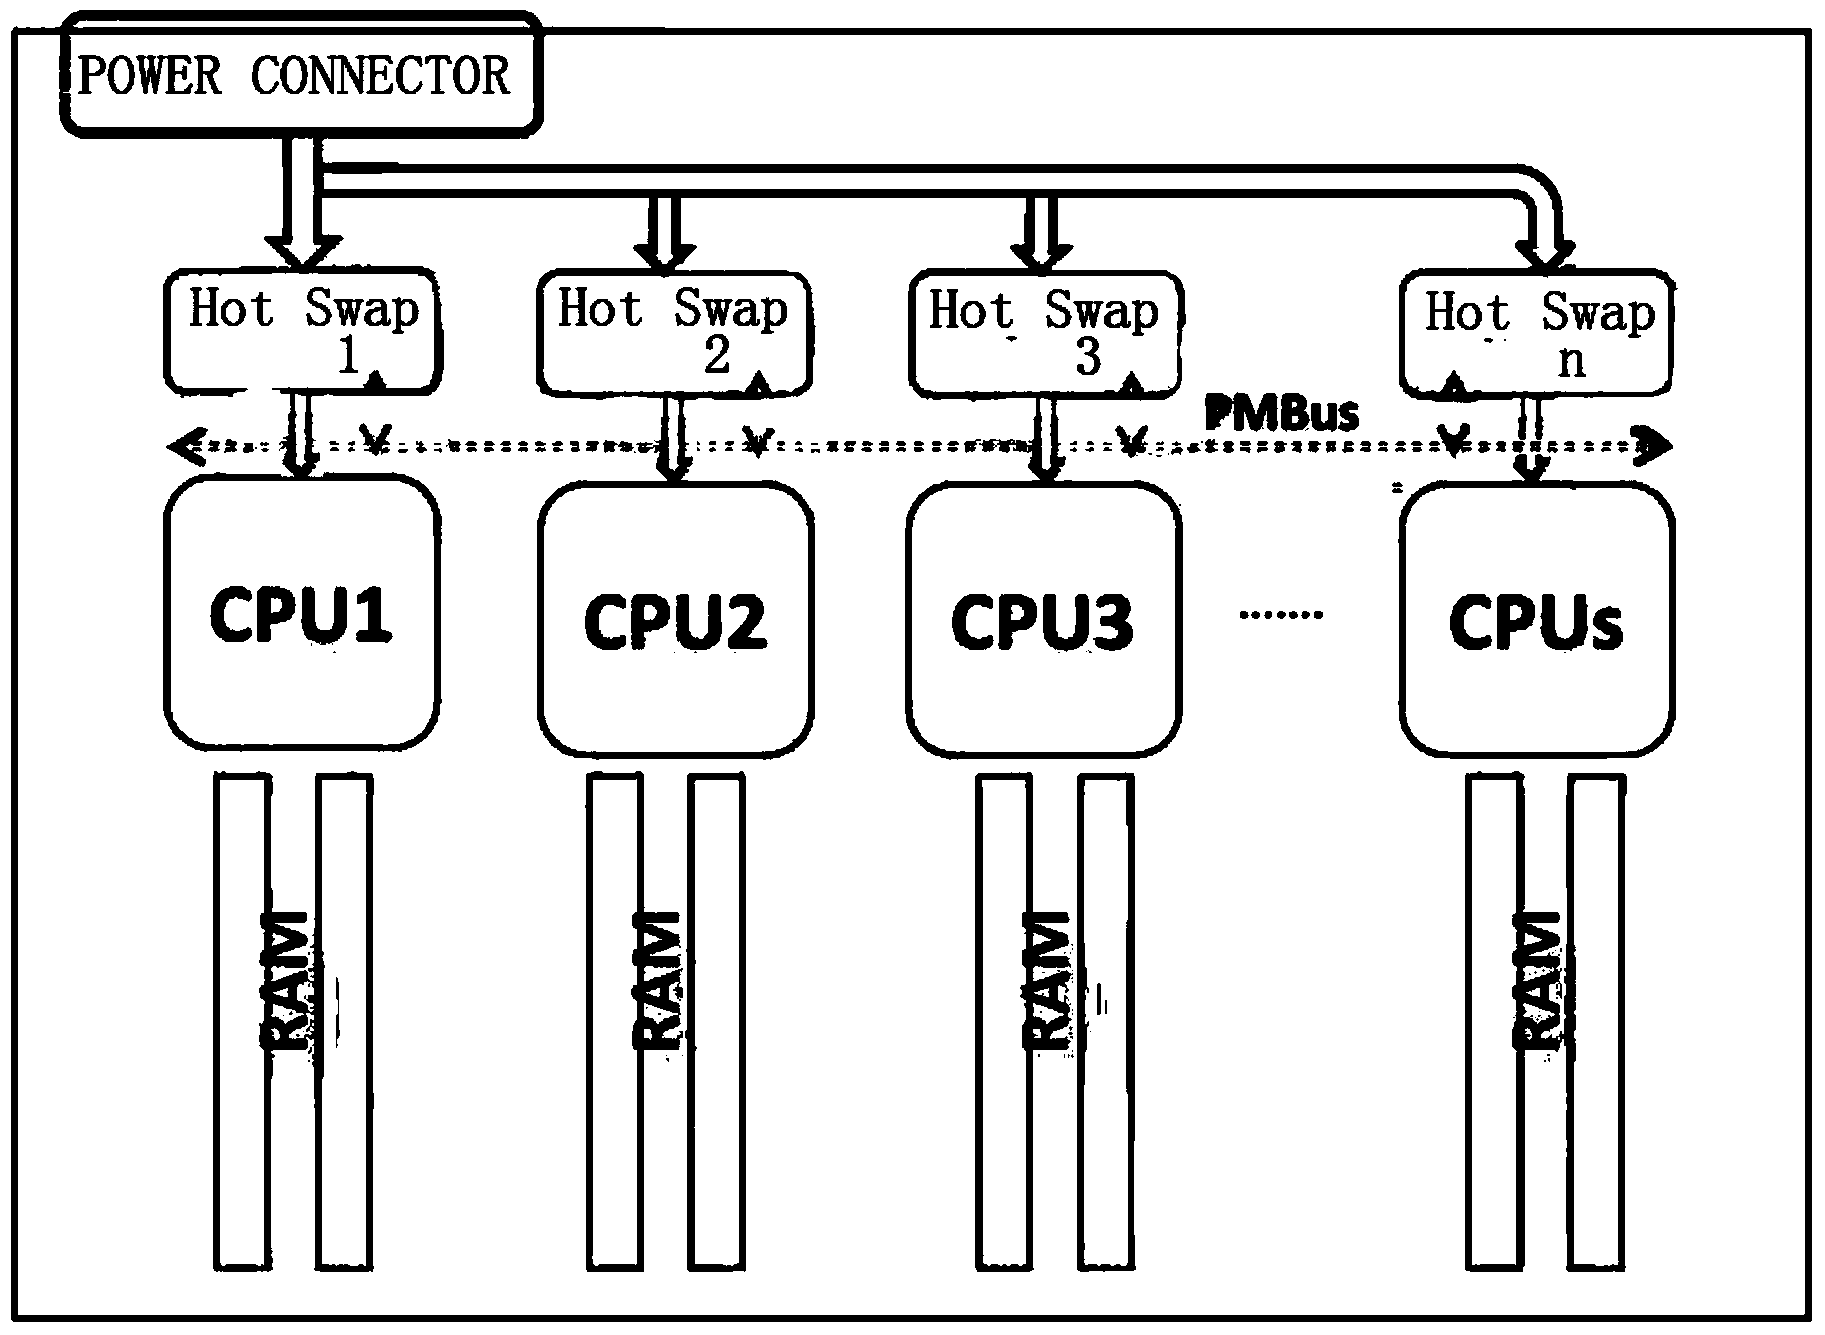 Hot swap protection circuit system